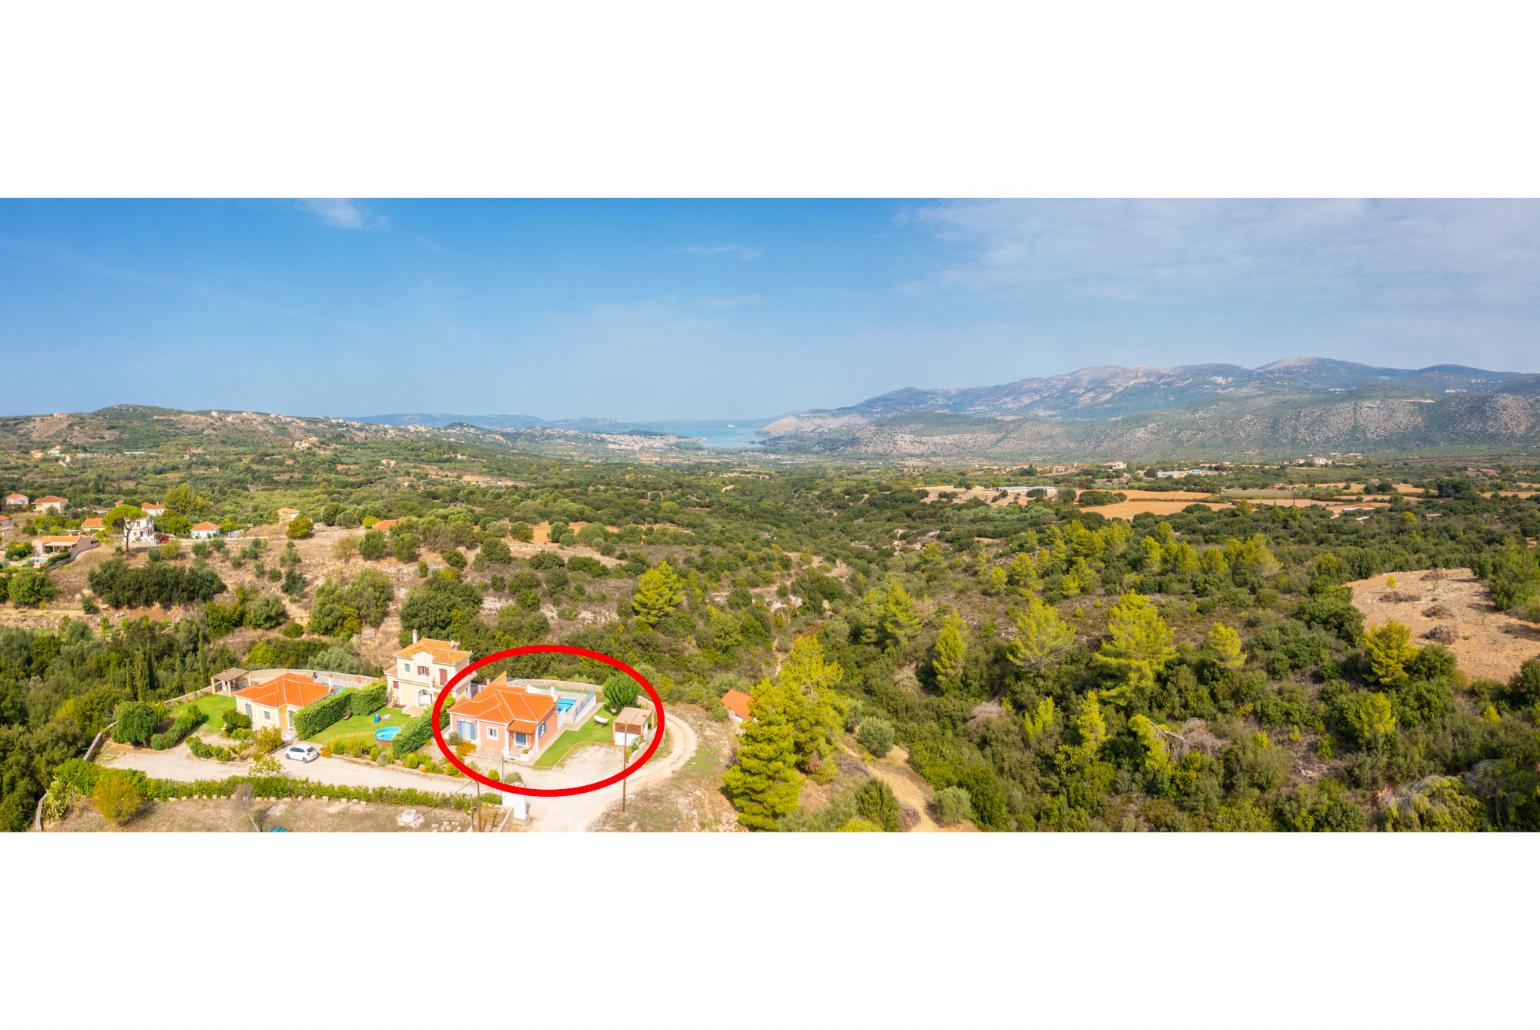 Aerial view showing location of Villa Europe Ena